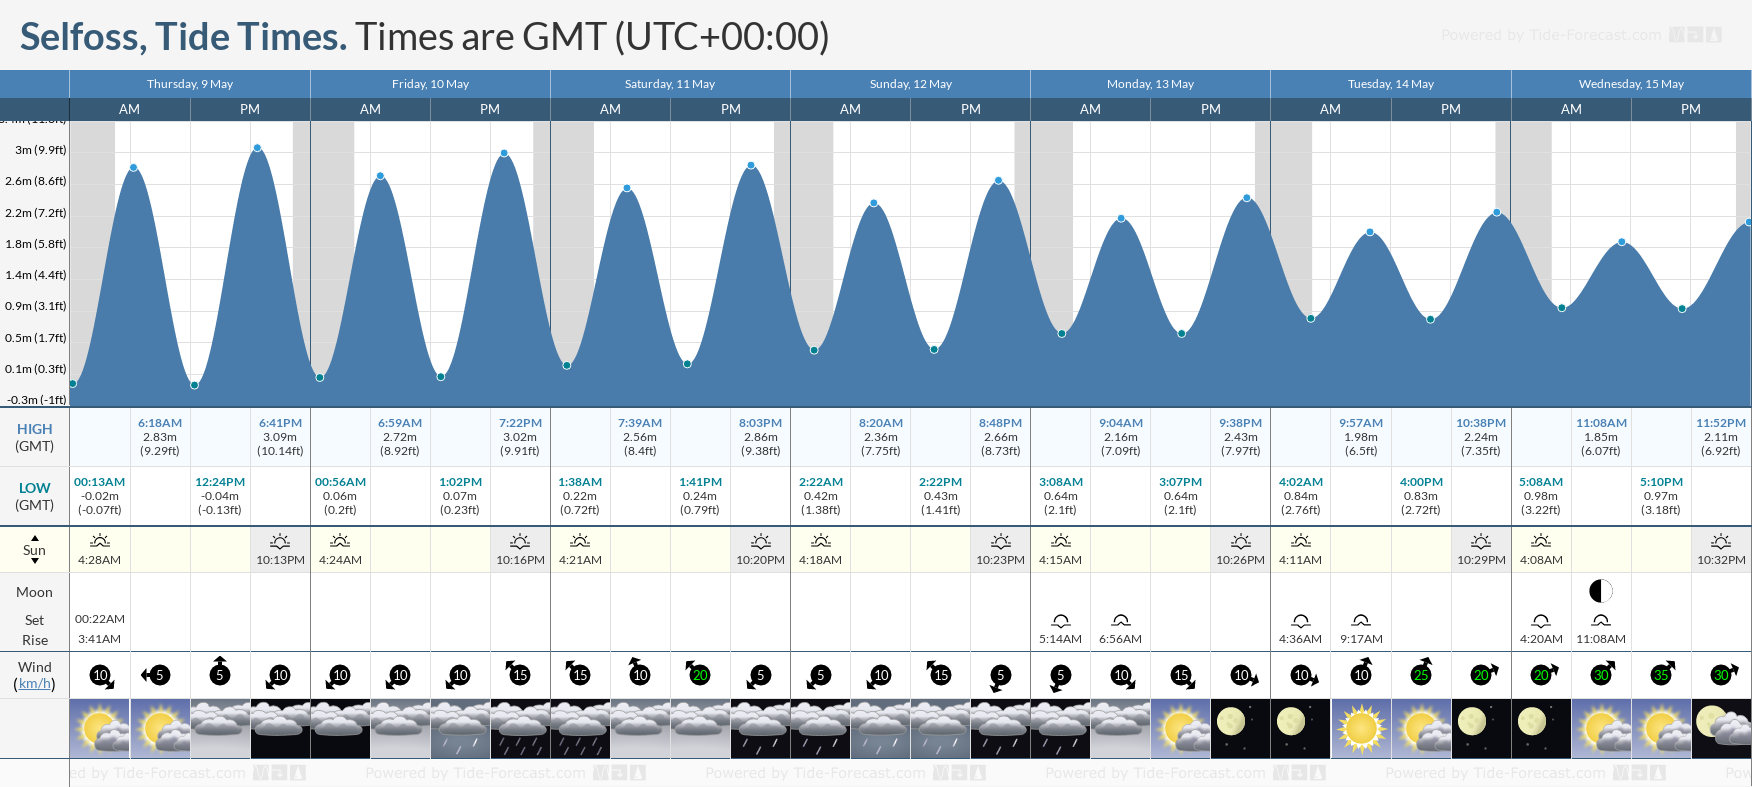 Selfoss Tide Chart including high and low tide times for the next 7 days